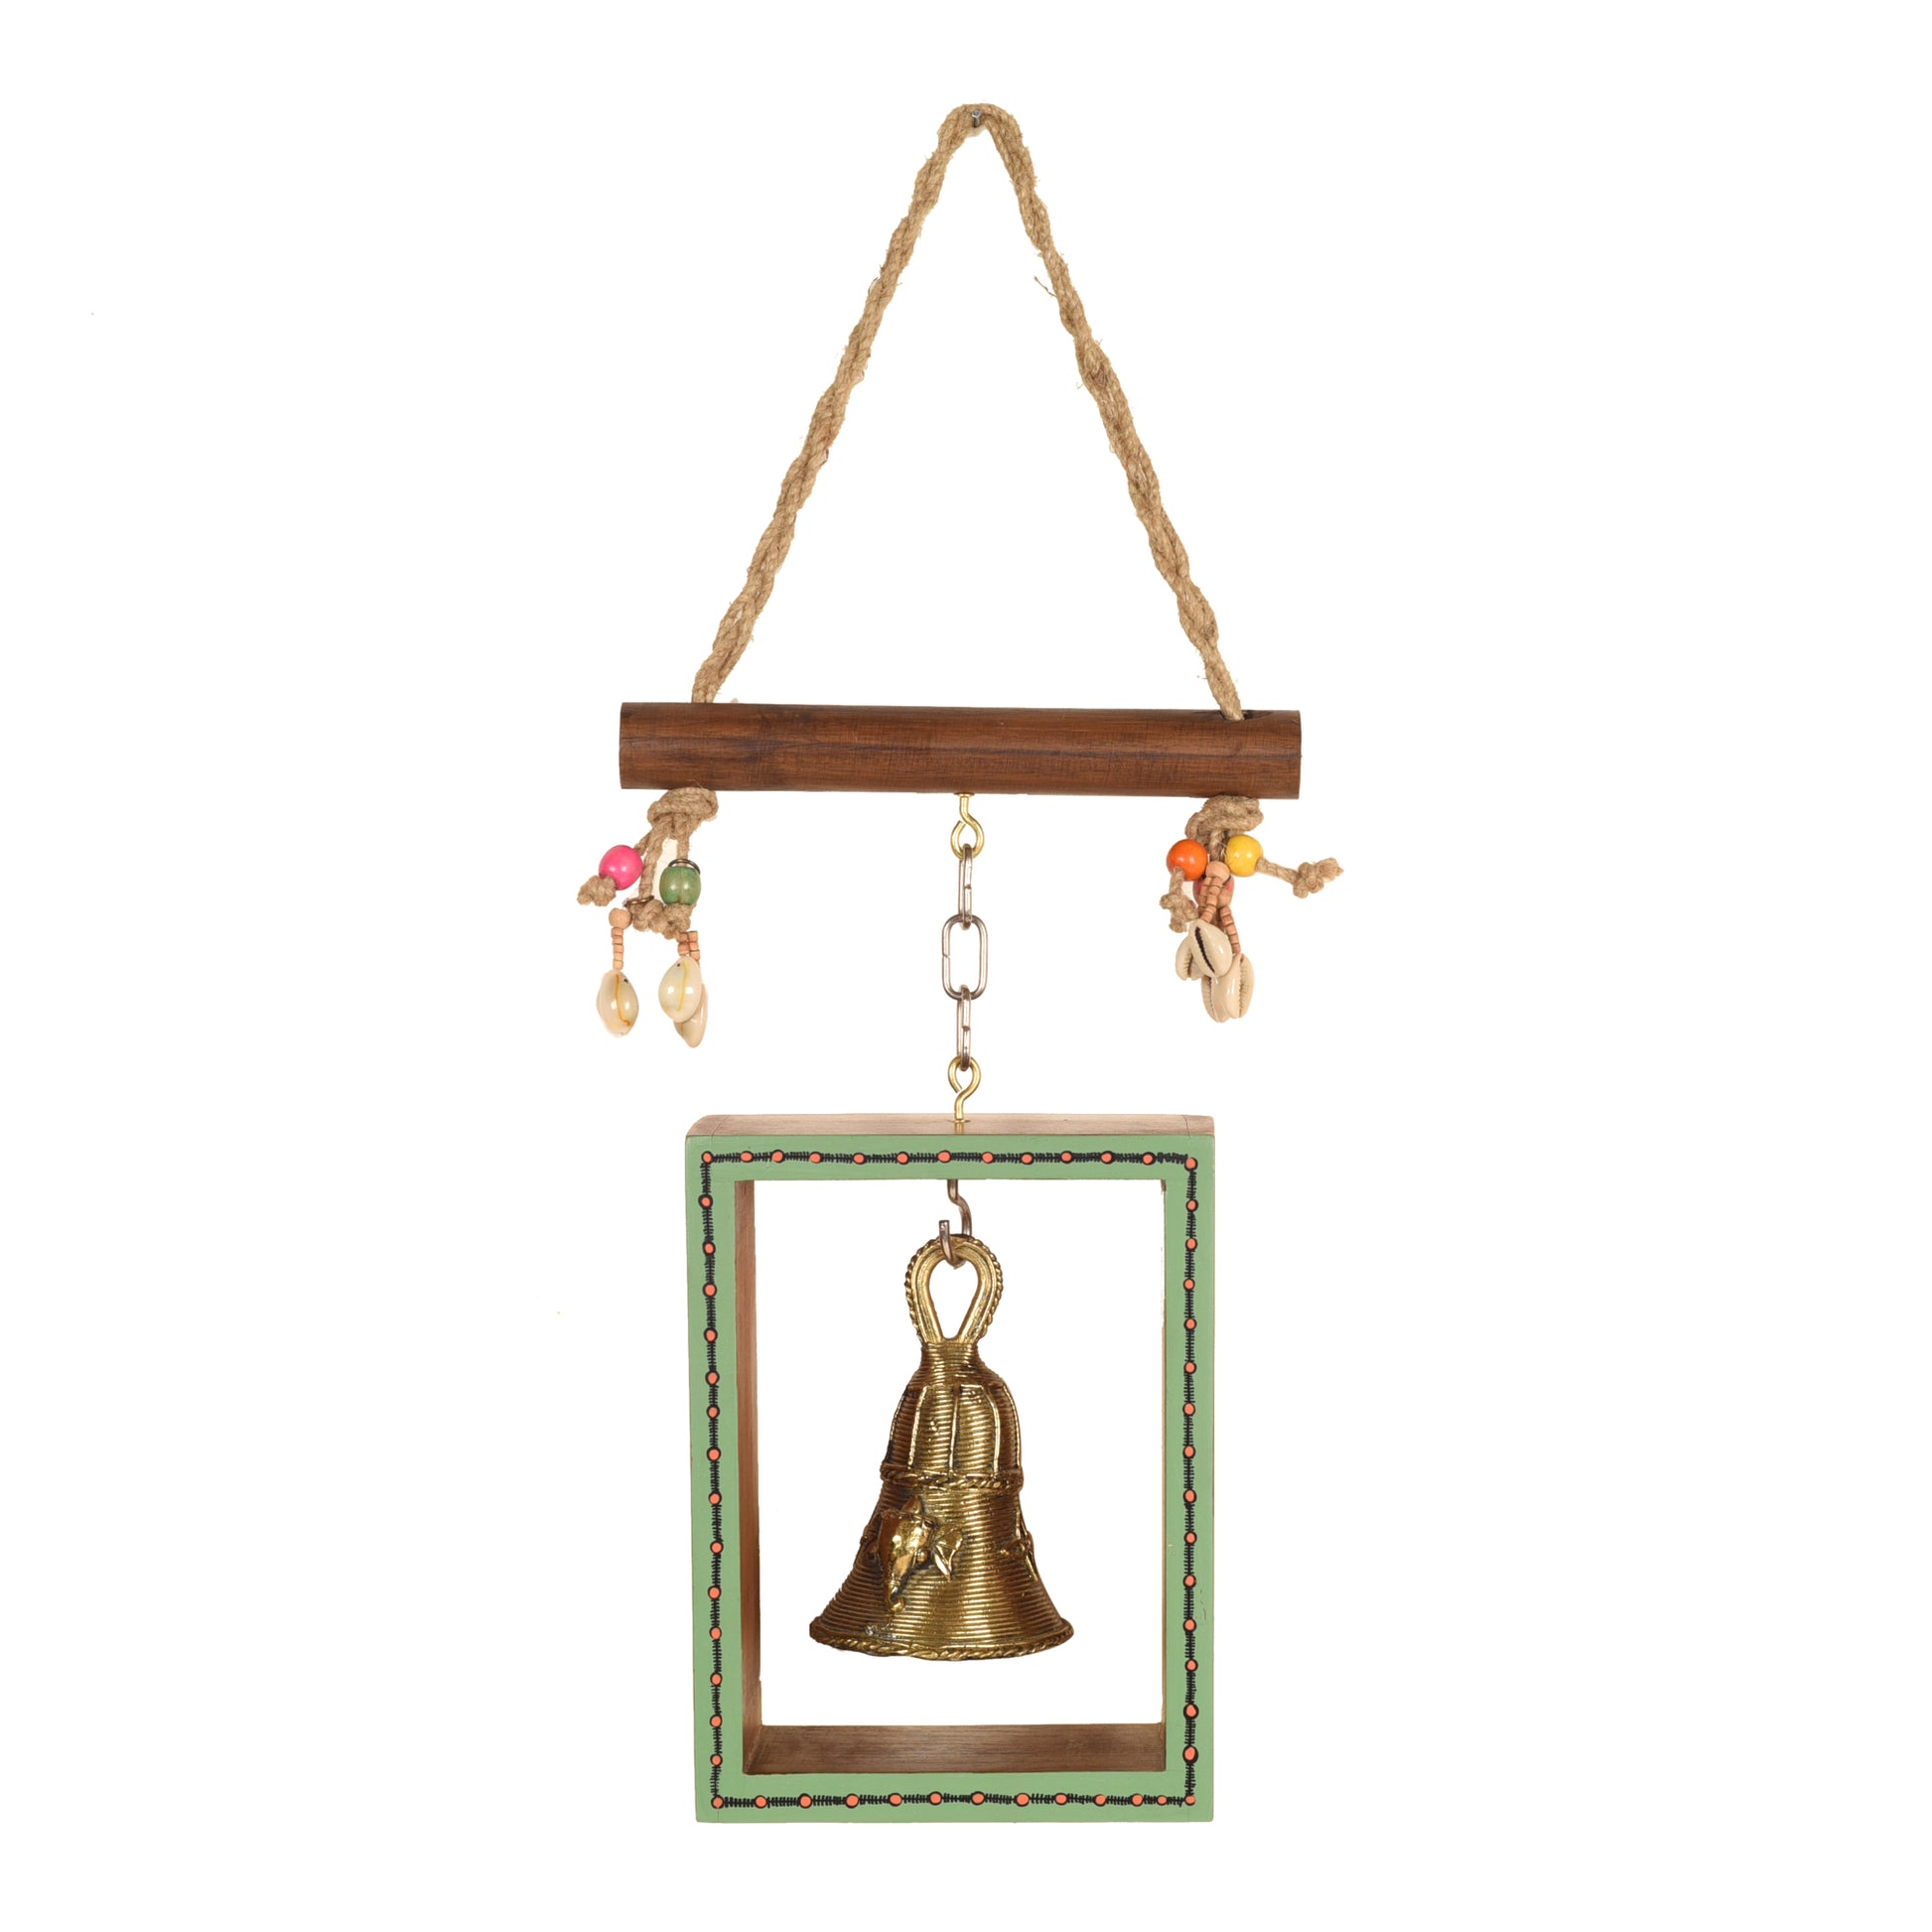 Wind Chime Bell
